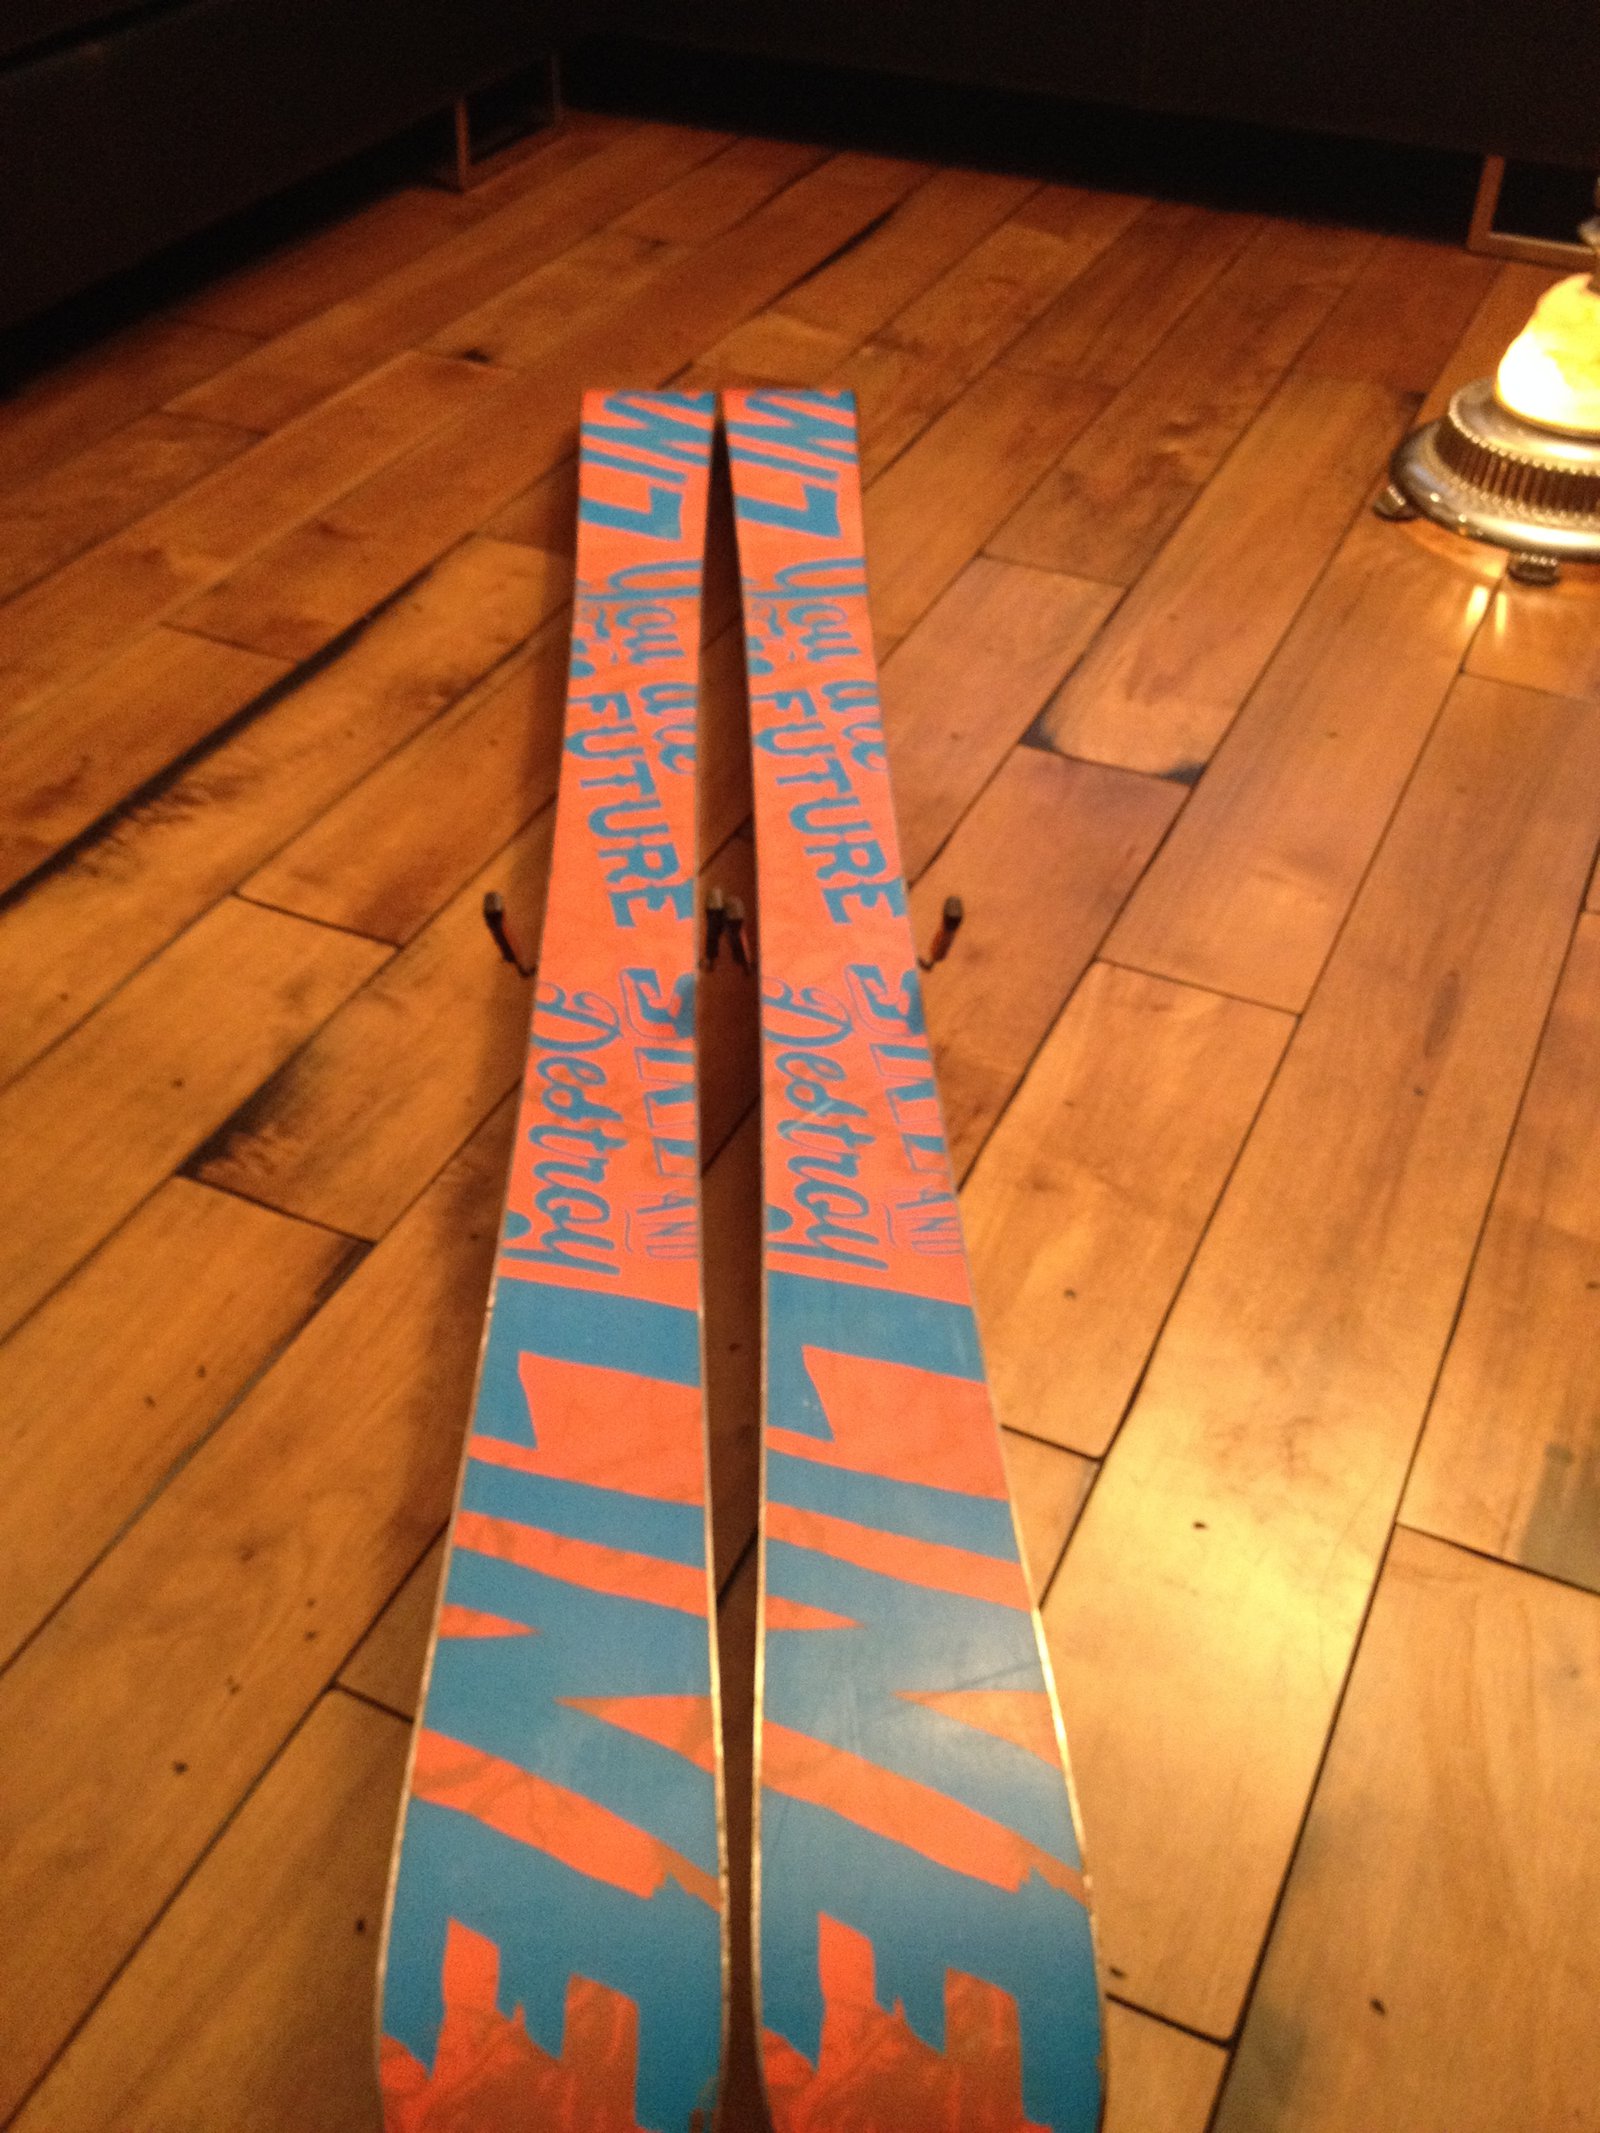  Pair of 2011/2012 Line Mastermind twin tip skis size 157